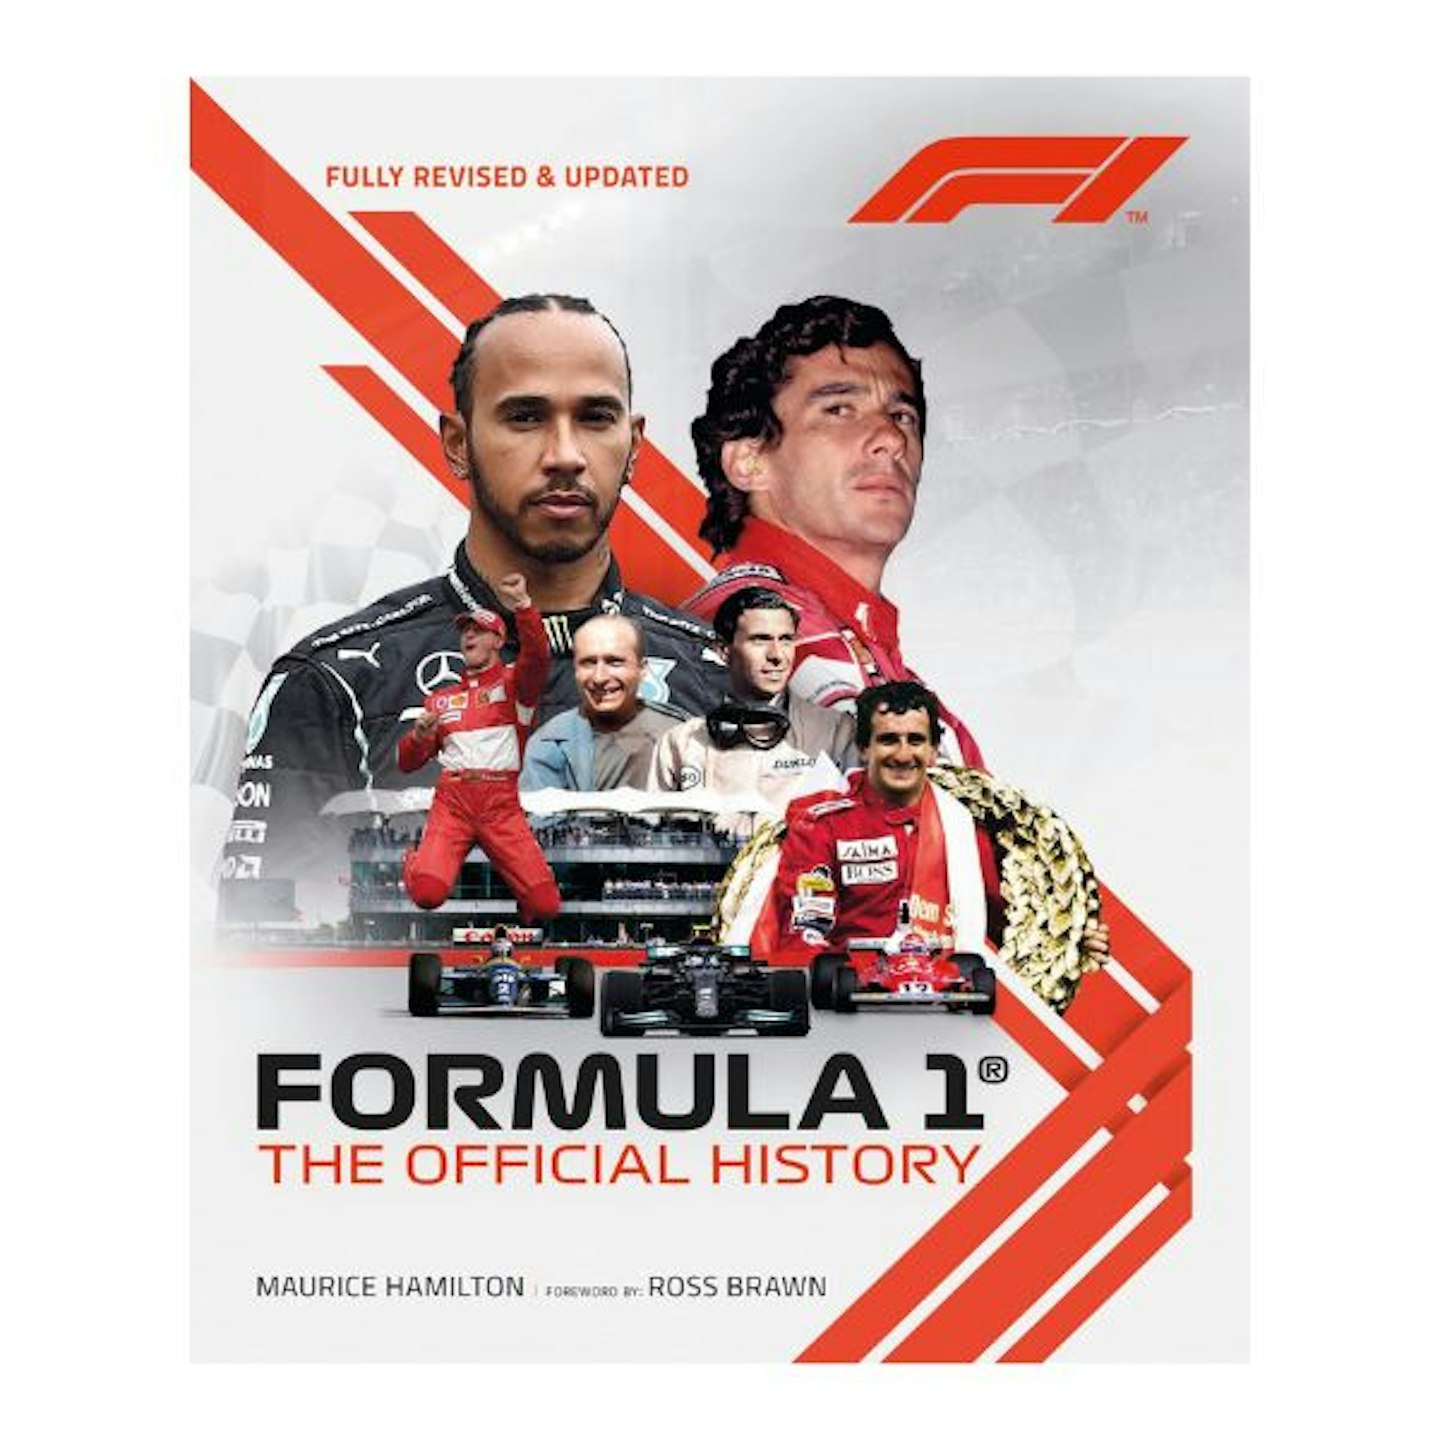 Formula 1: The Official History by Maurice Hamilton